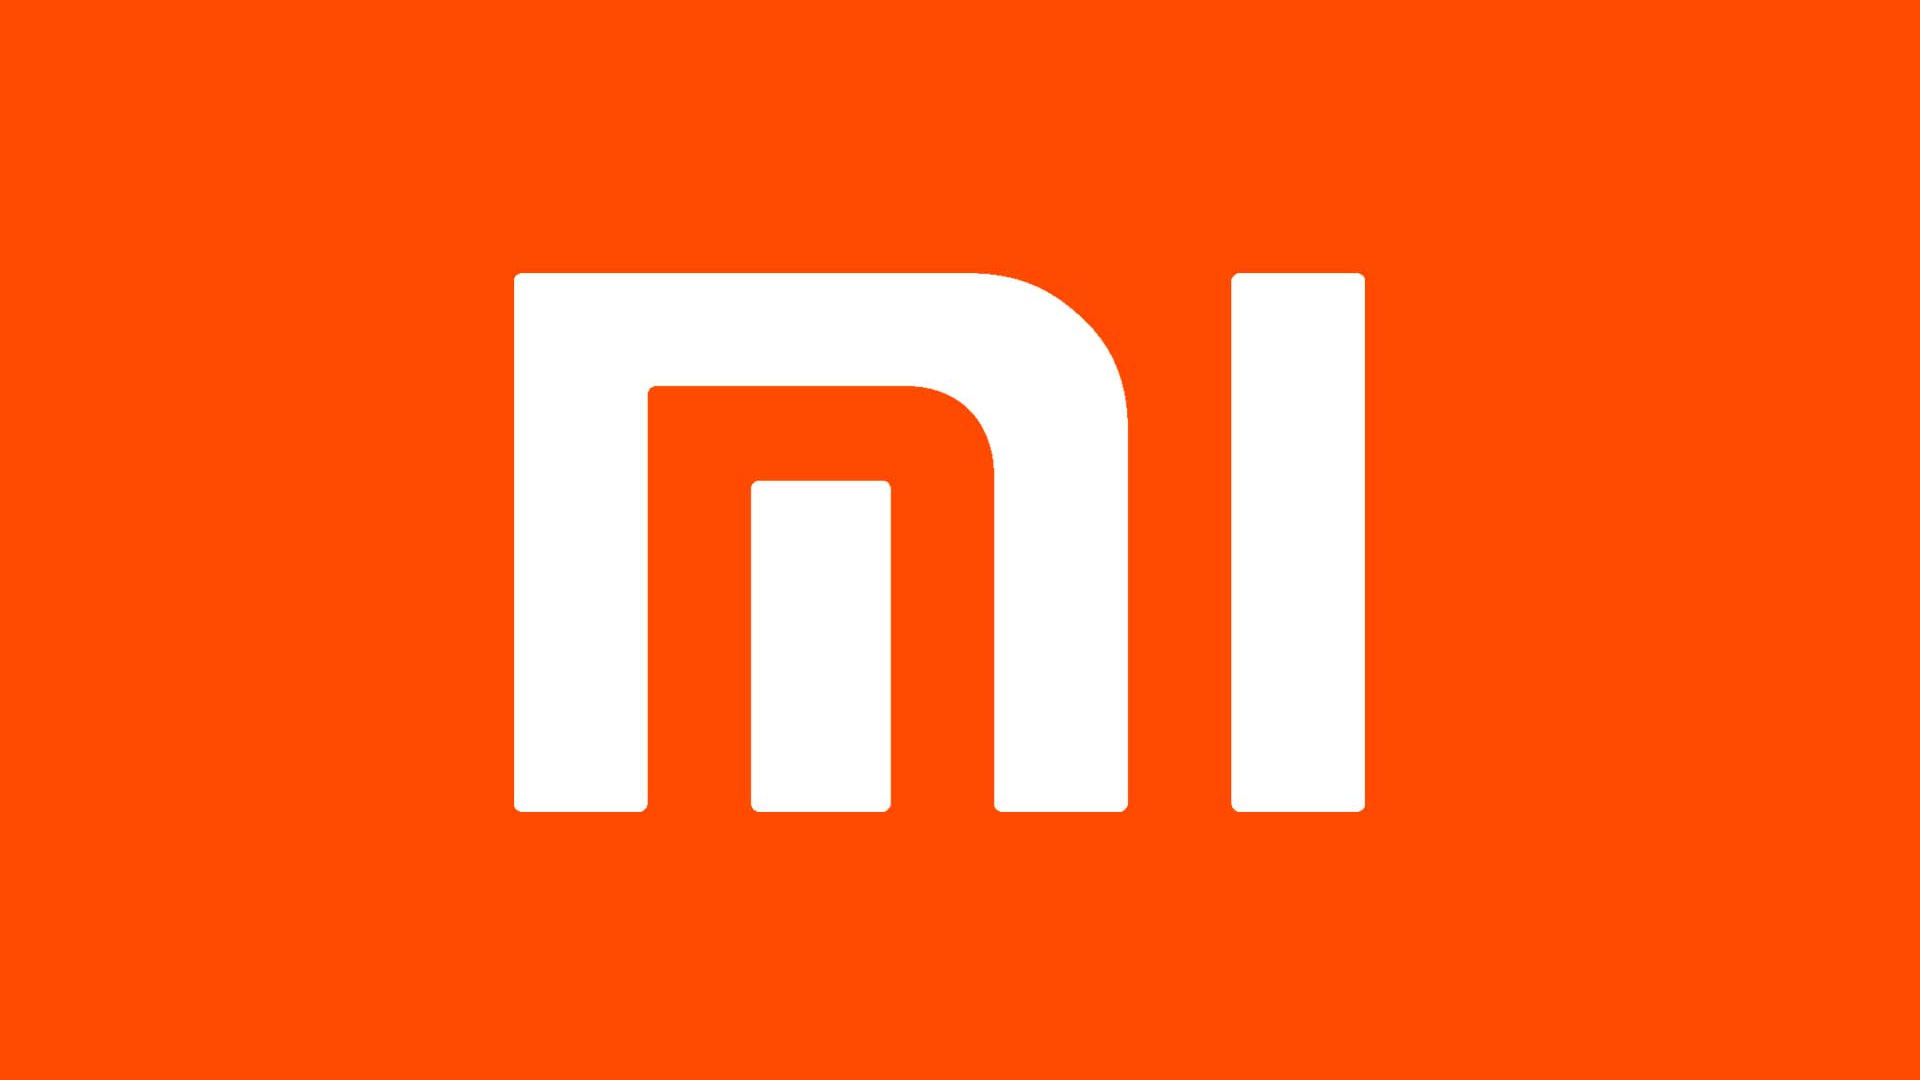 Xiaomi: Chinese phone company, The gadget giant rapidly growing in the West. 1920x1080 Full HD Background.